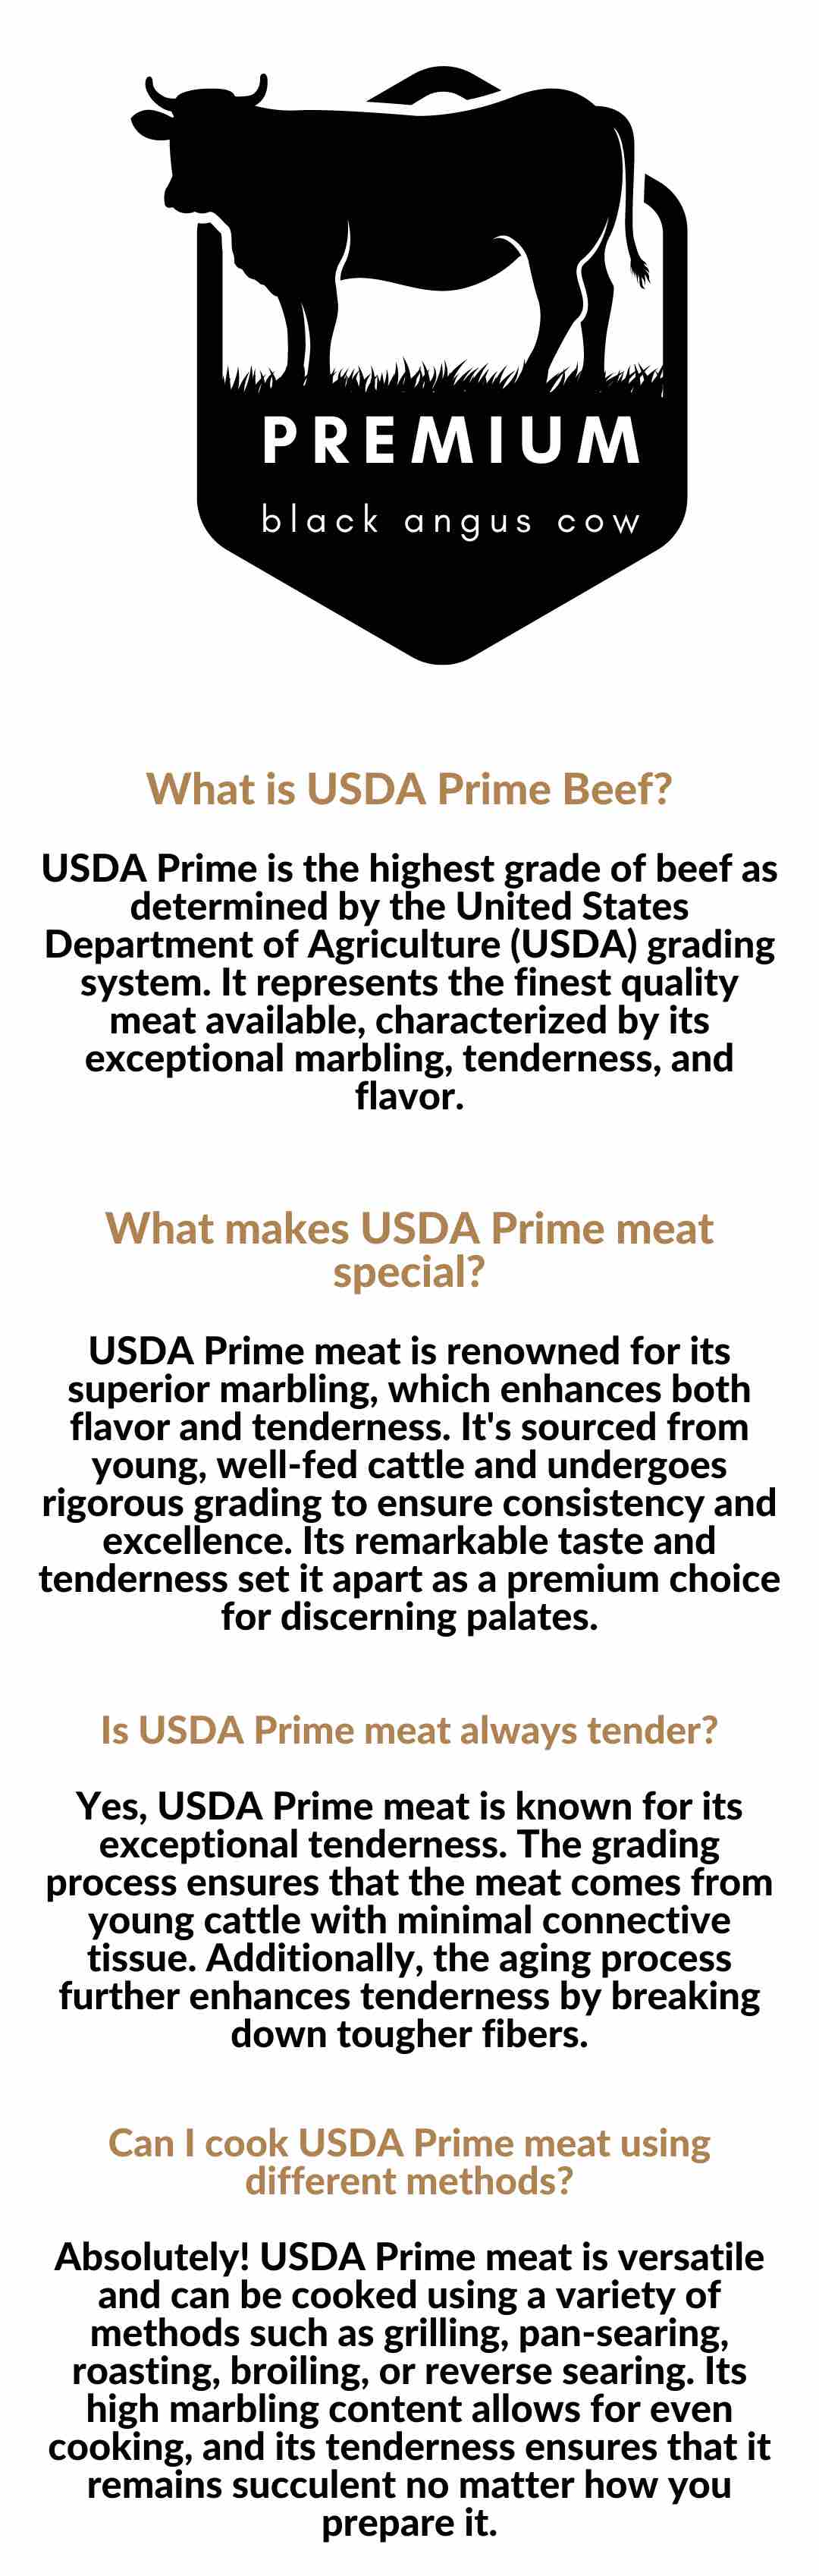 What is USDA Prime Beef - Mobile